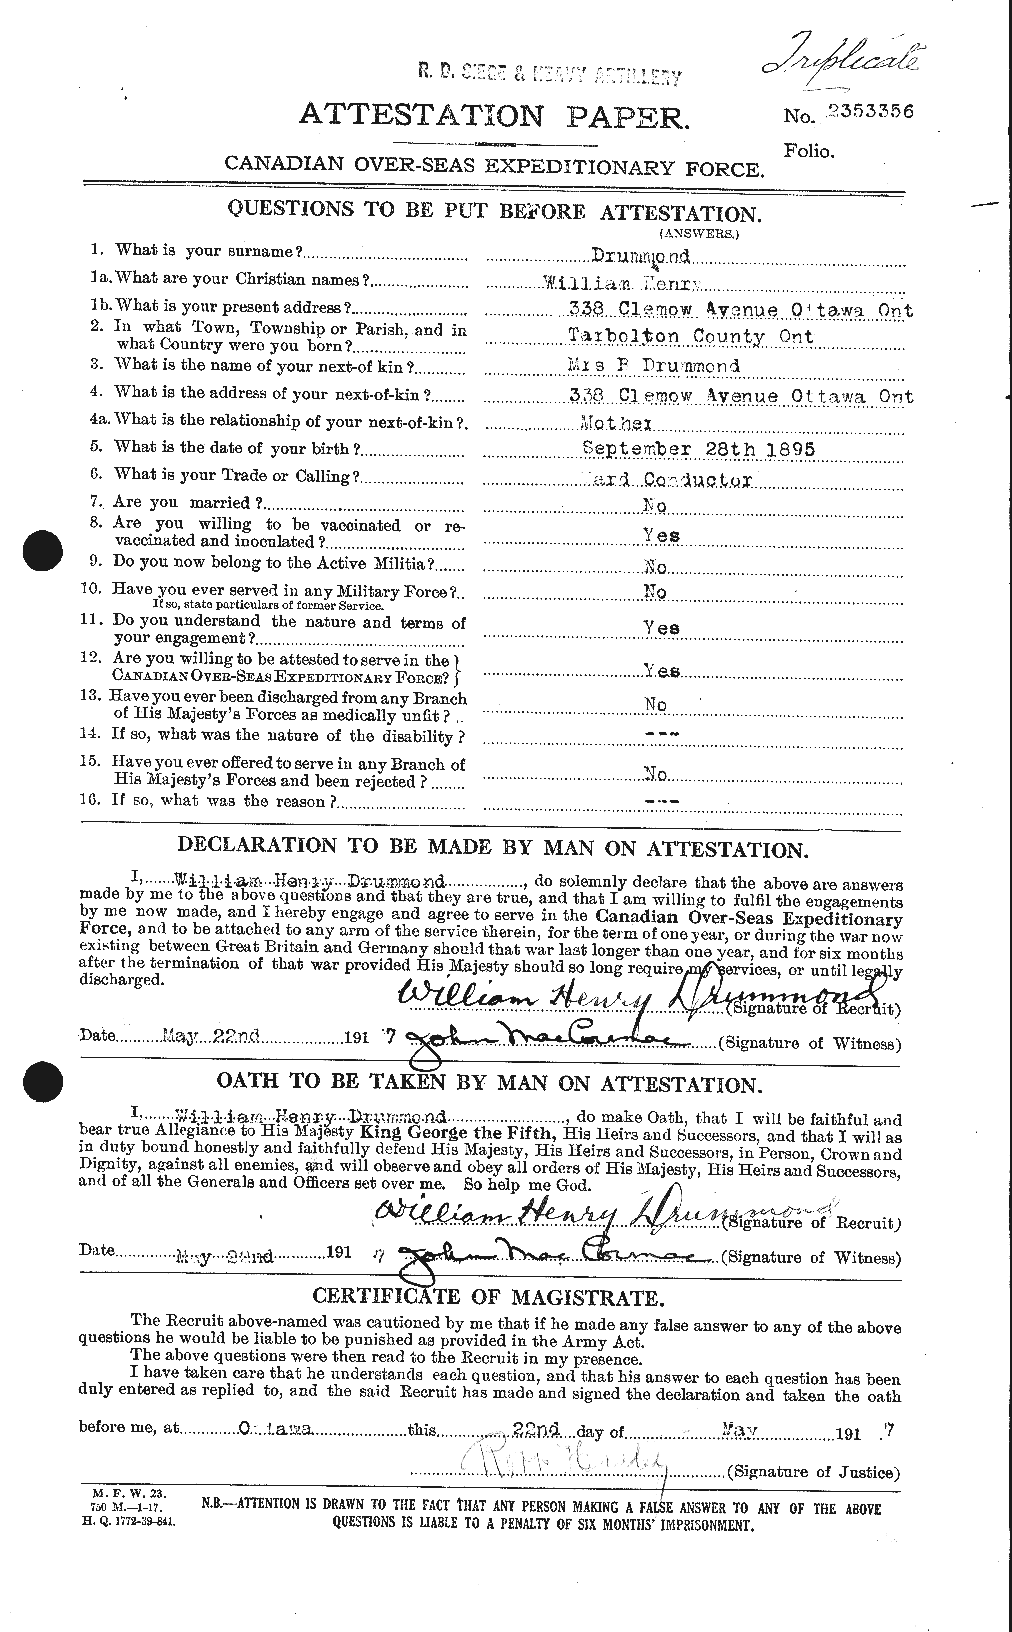 Personnel Records of the First World War - CEF 300960a